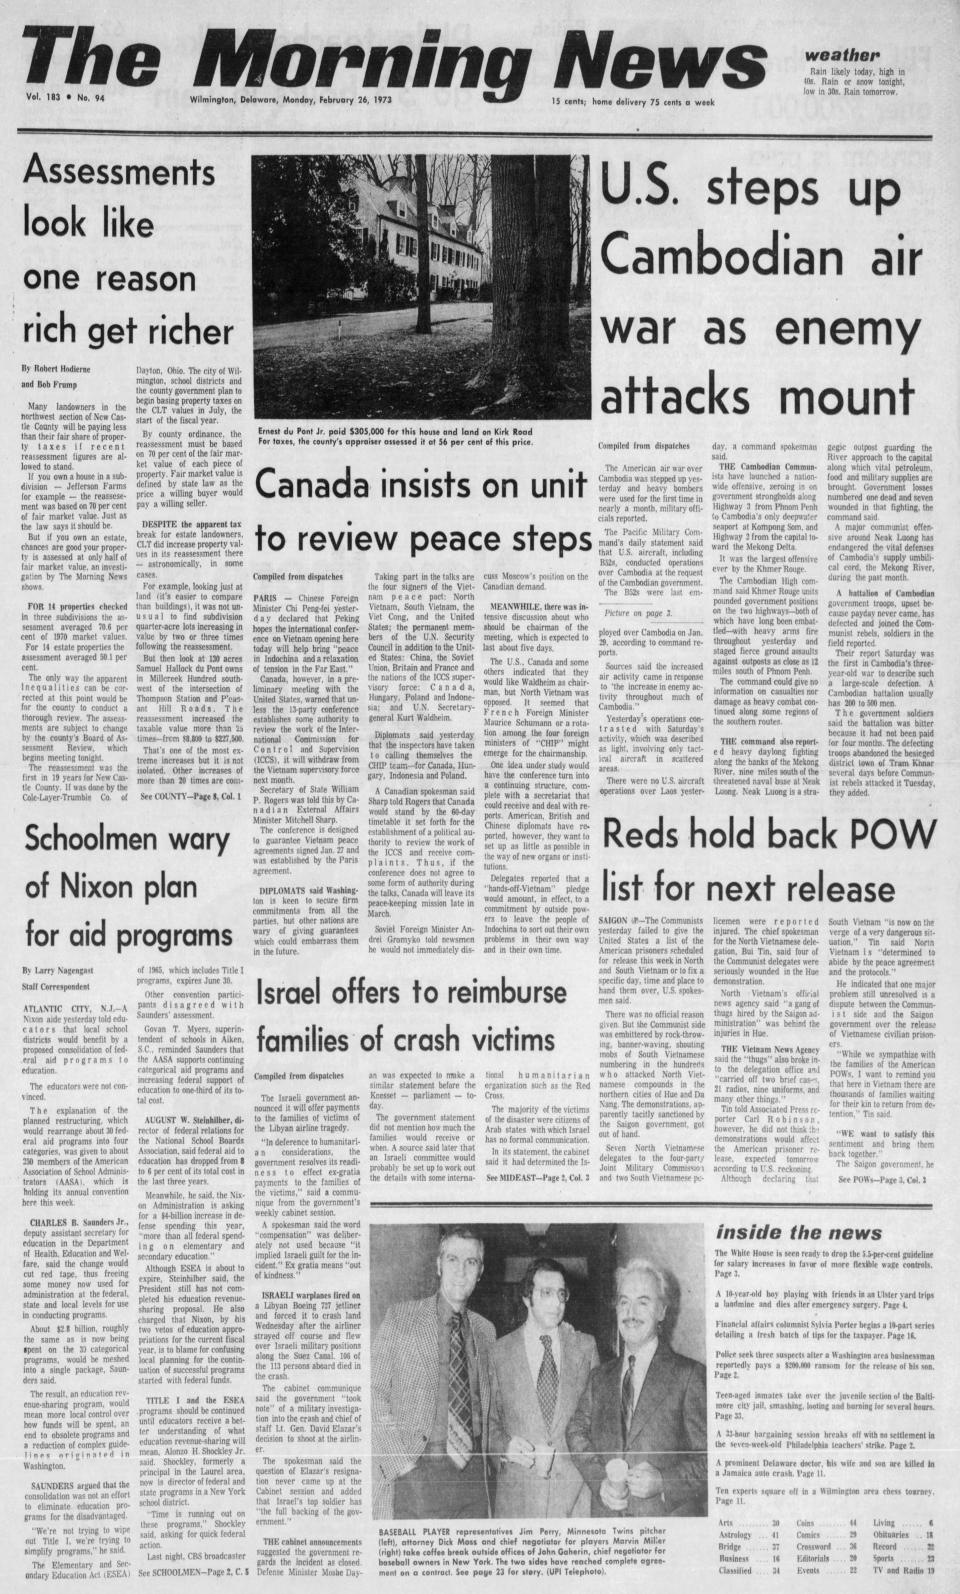 Front page of The Morning News from Feb. 26, 1973.